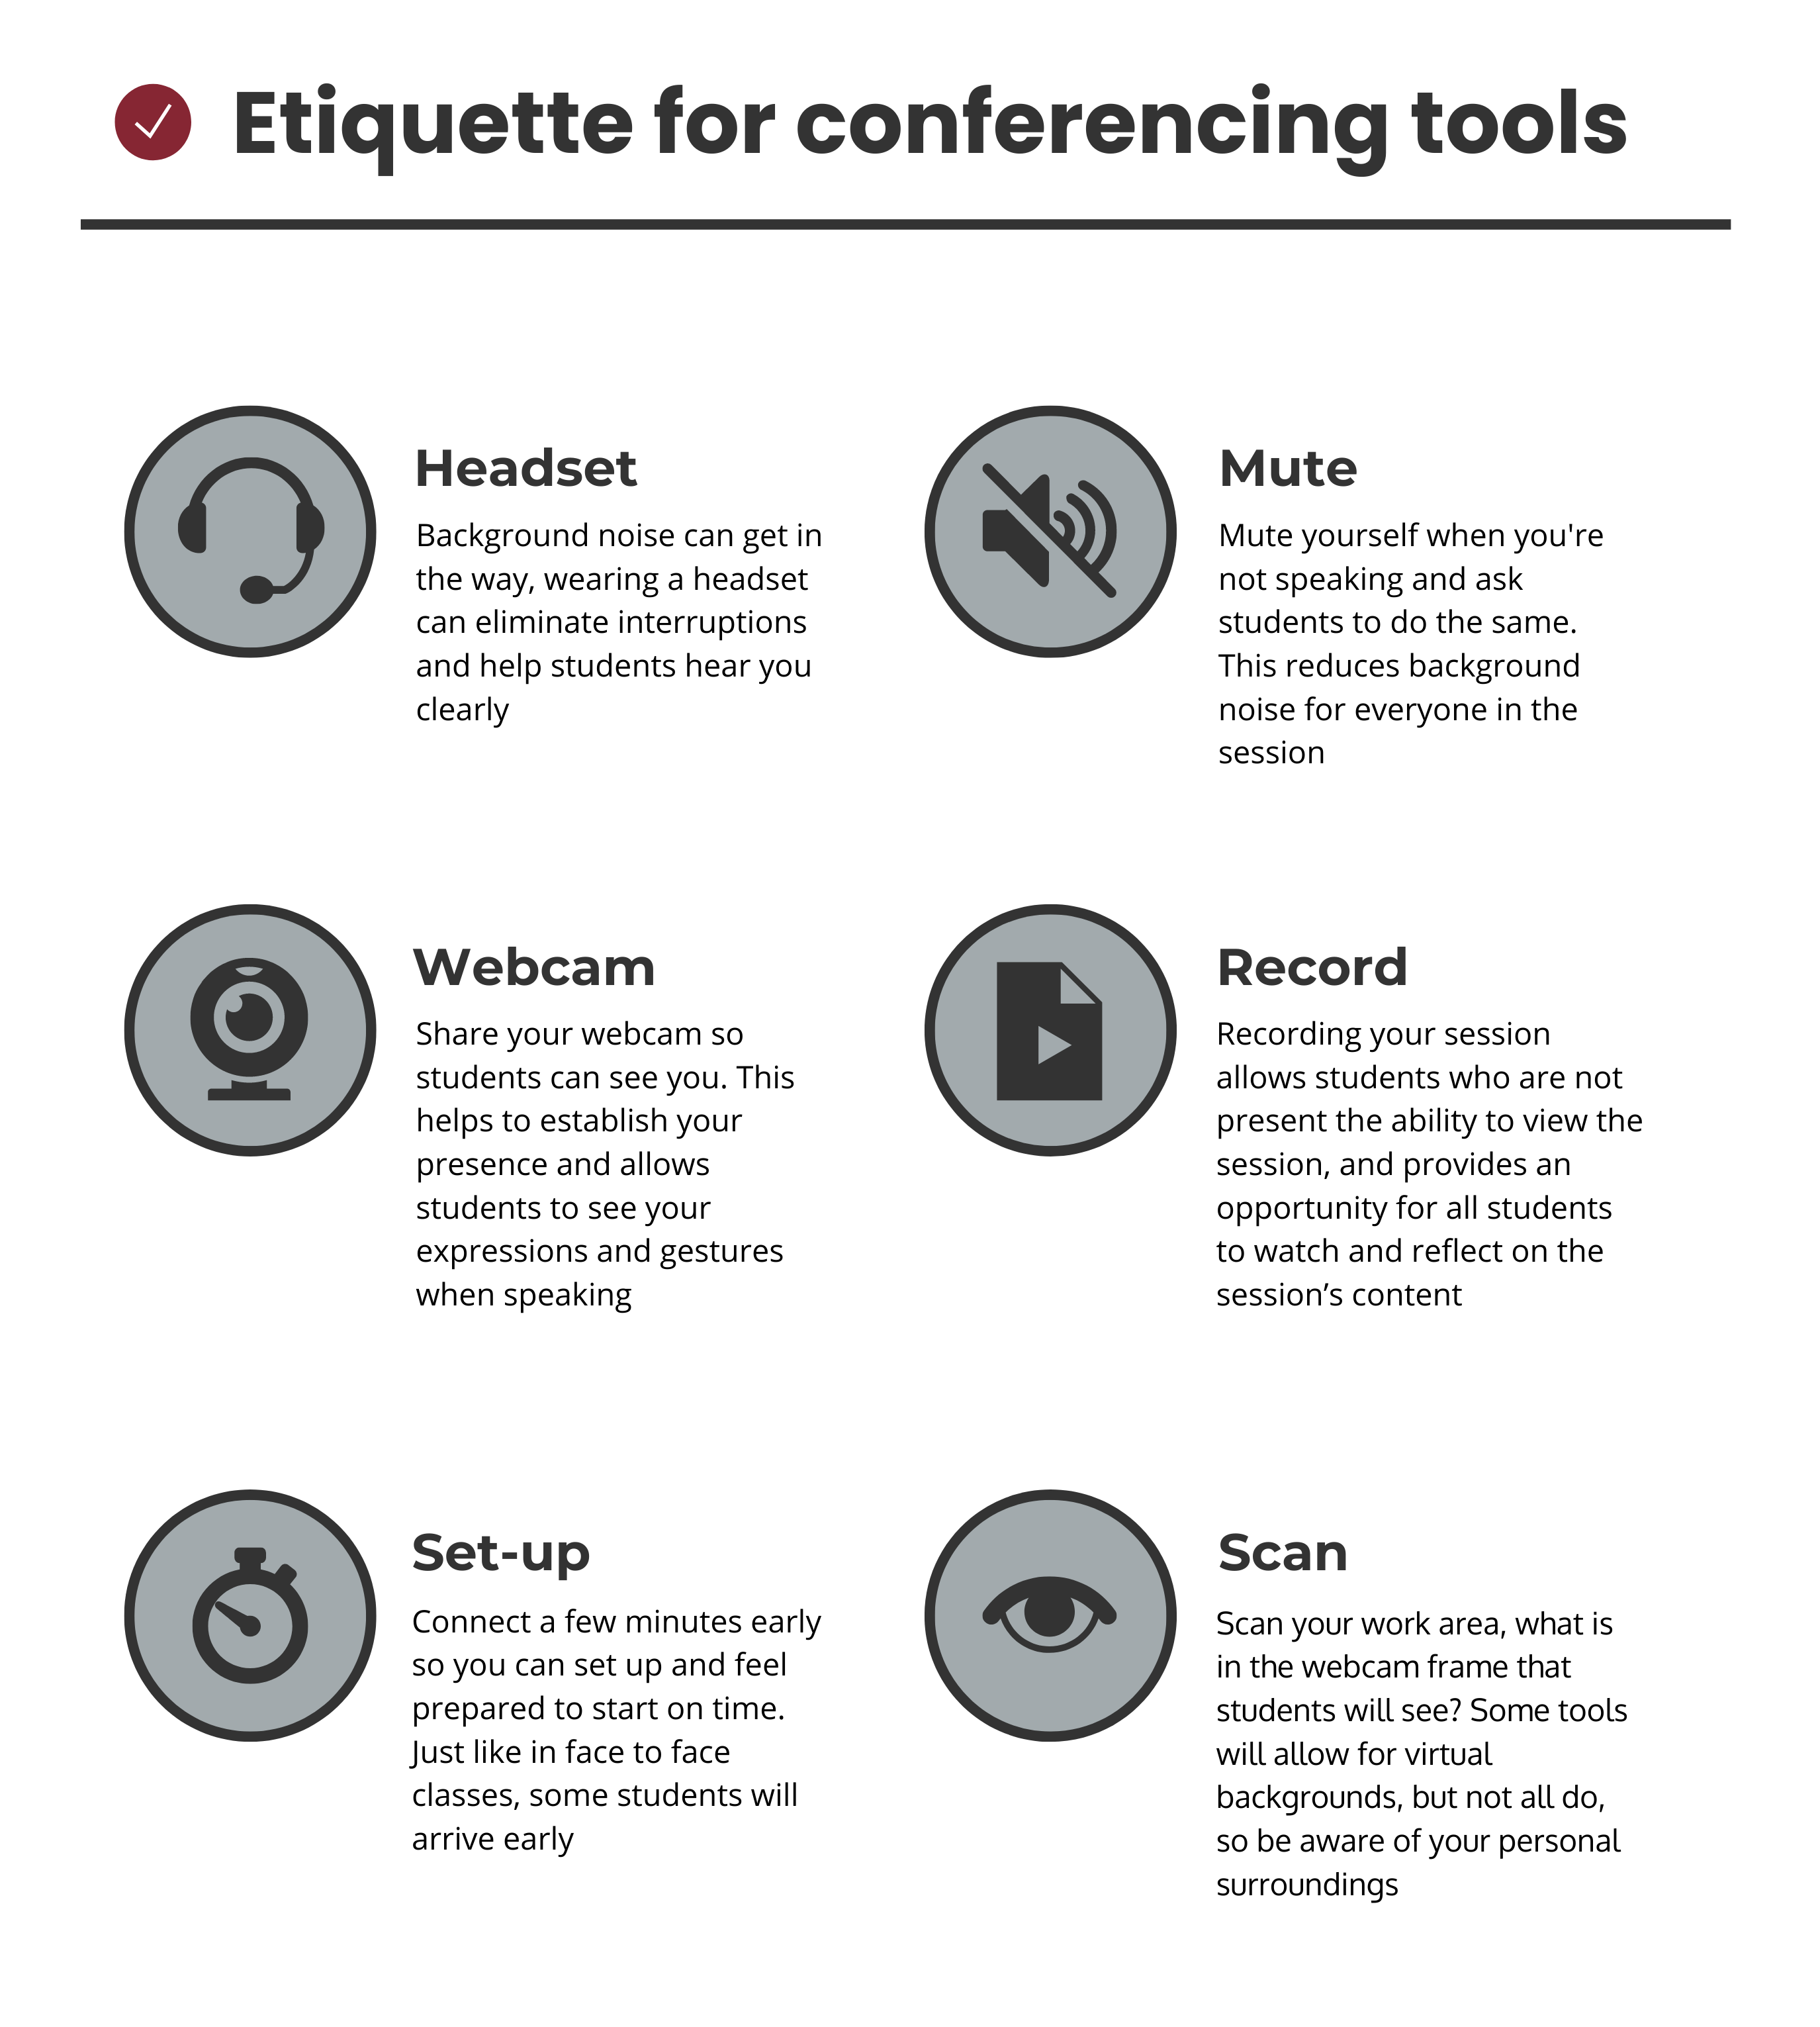 An infographic providing various etiquette tips for using conferencing tools